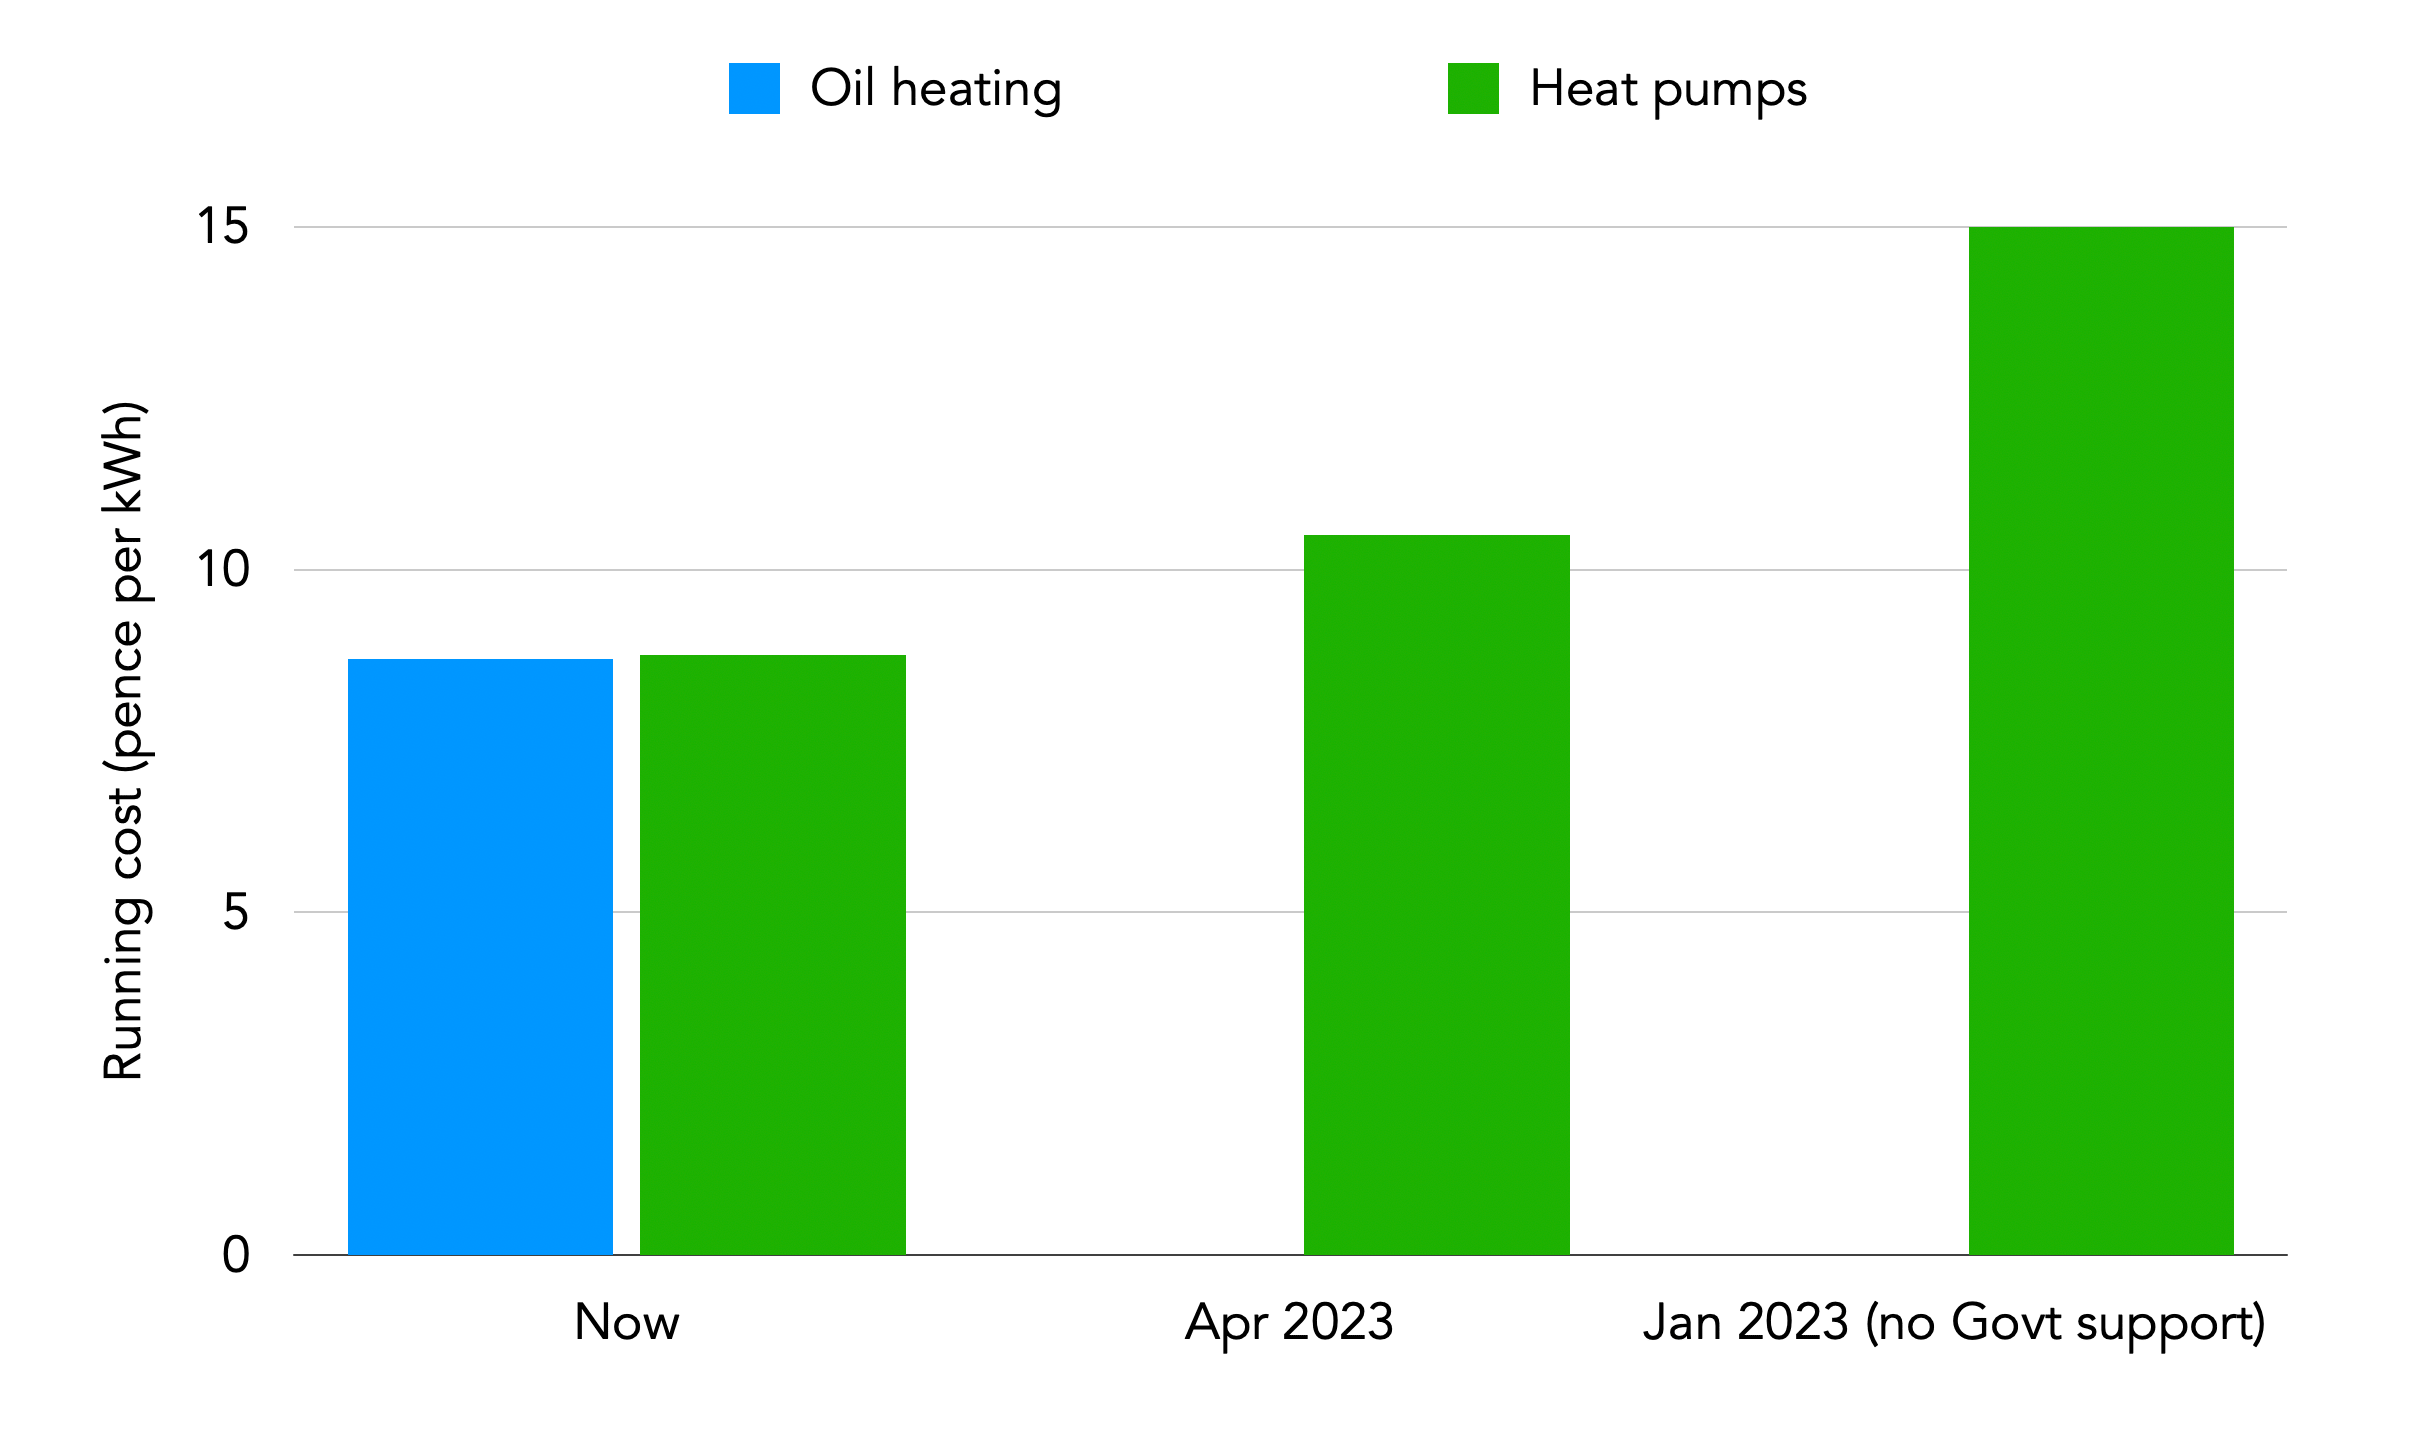 Running costs of oil heating and air source heat pumps